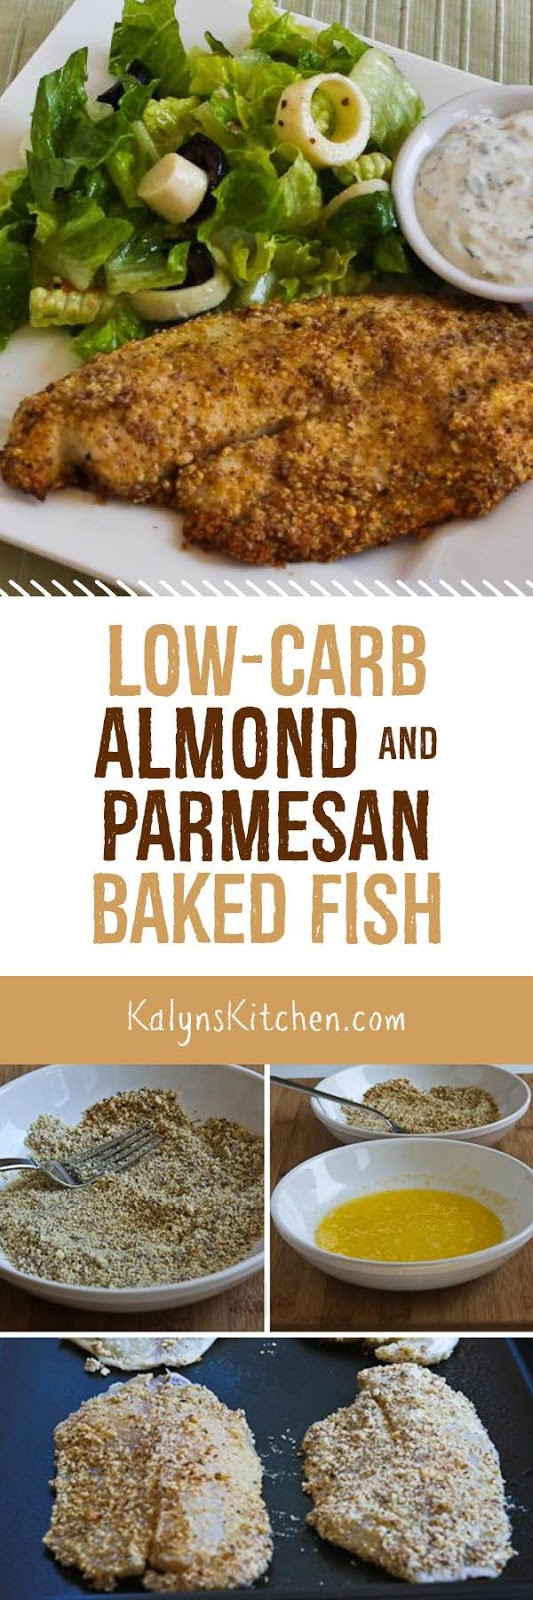 Low Carb Fish Recipes
 Low Carb Almond and Parmesan Baked Fish Kalyn s Kitchen